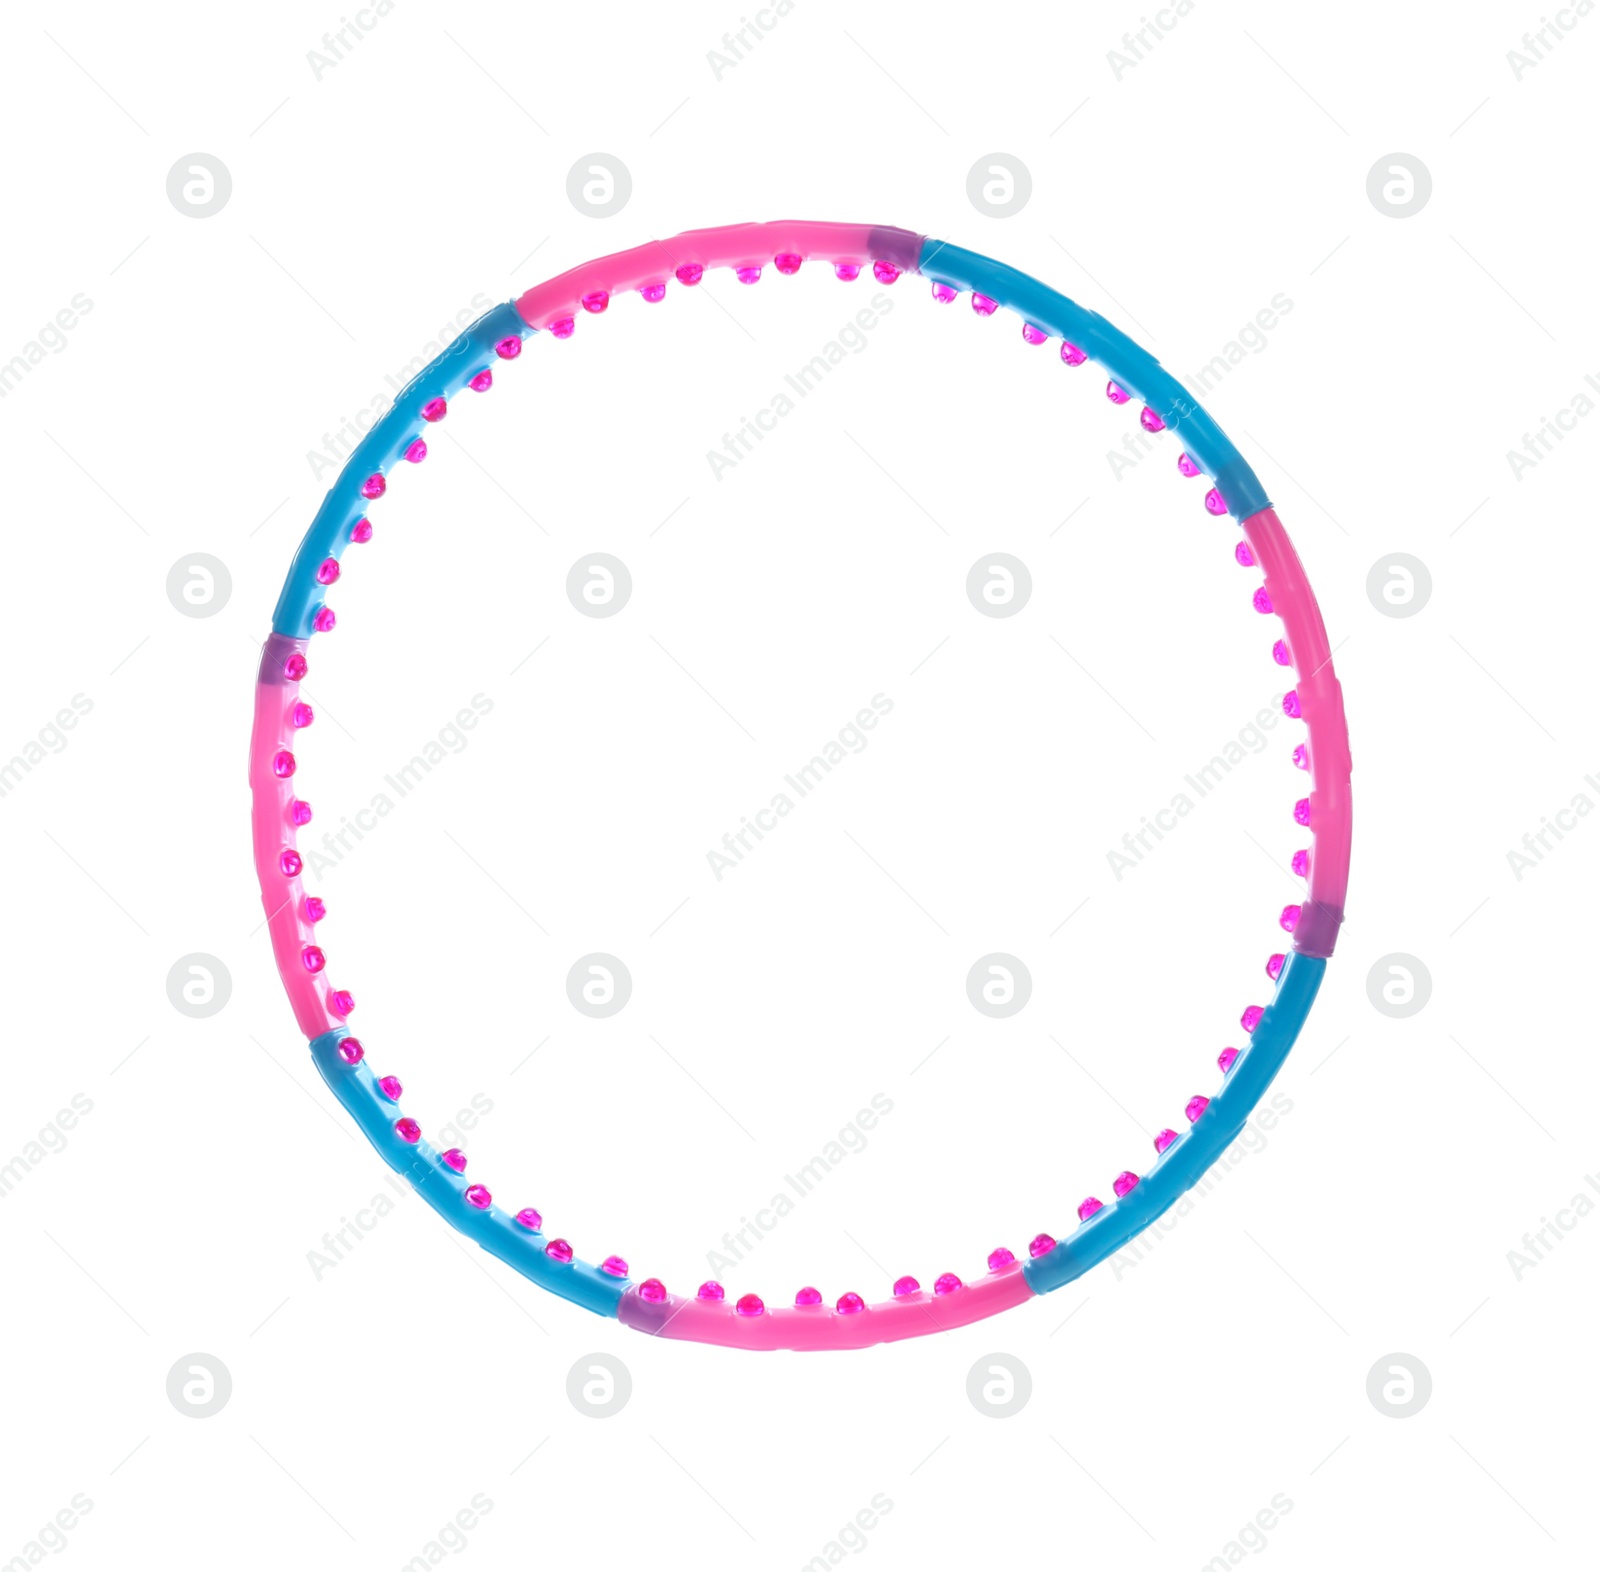 Photo of Hula hoop isolated on white. Sports equipment